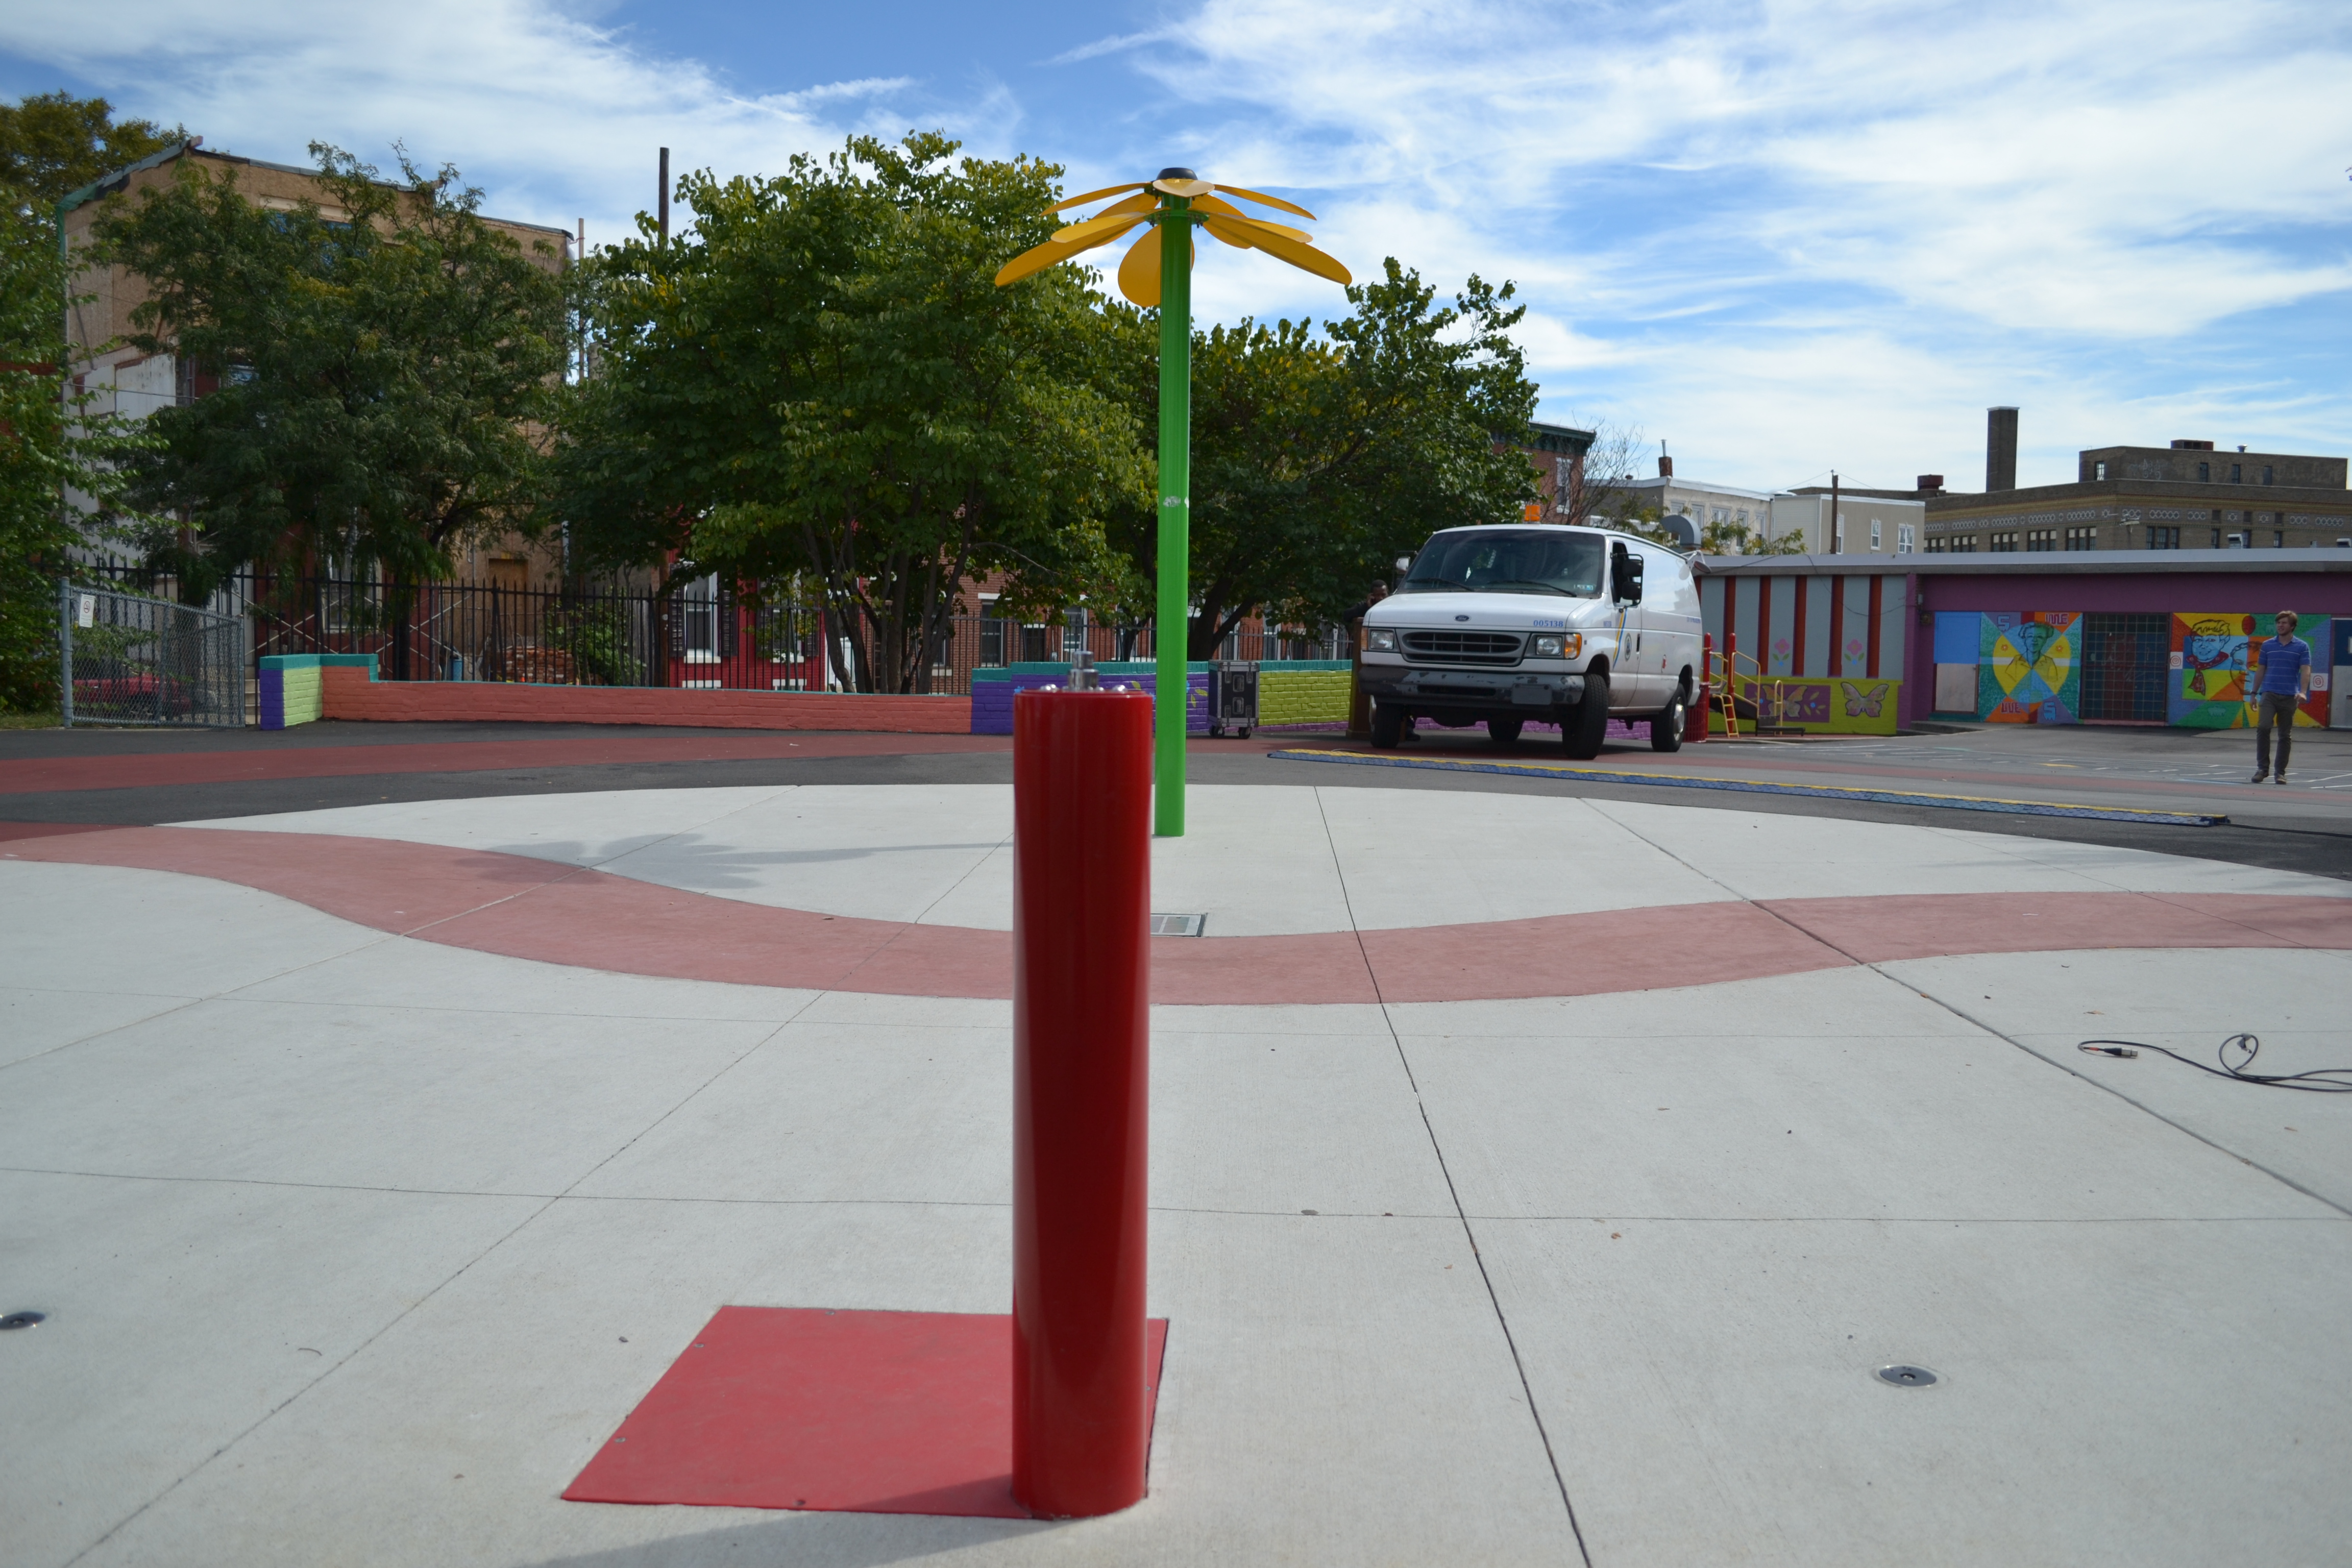 The renovated sprayground will be operated by a push button to conserve water